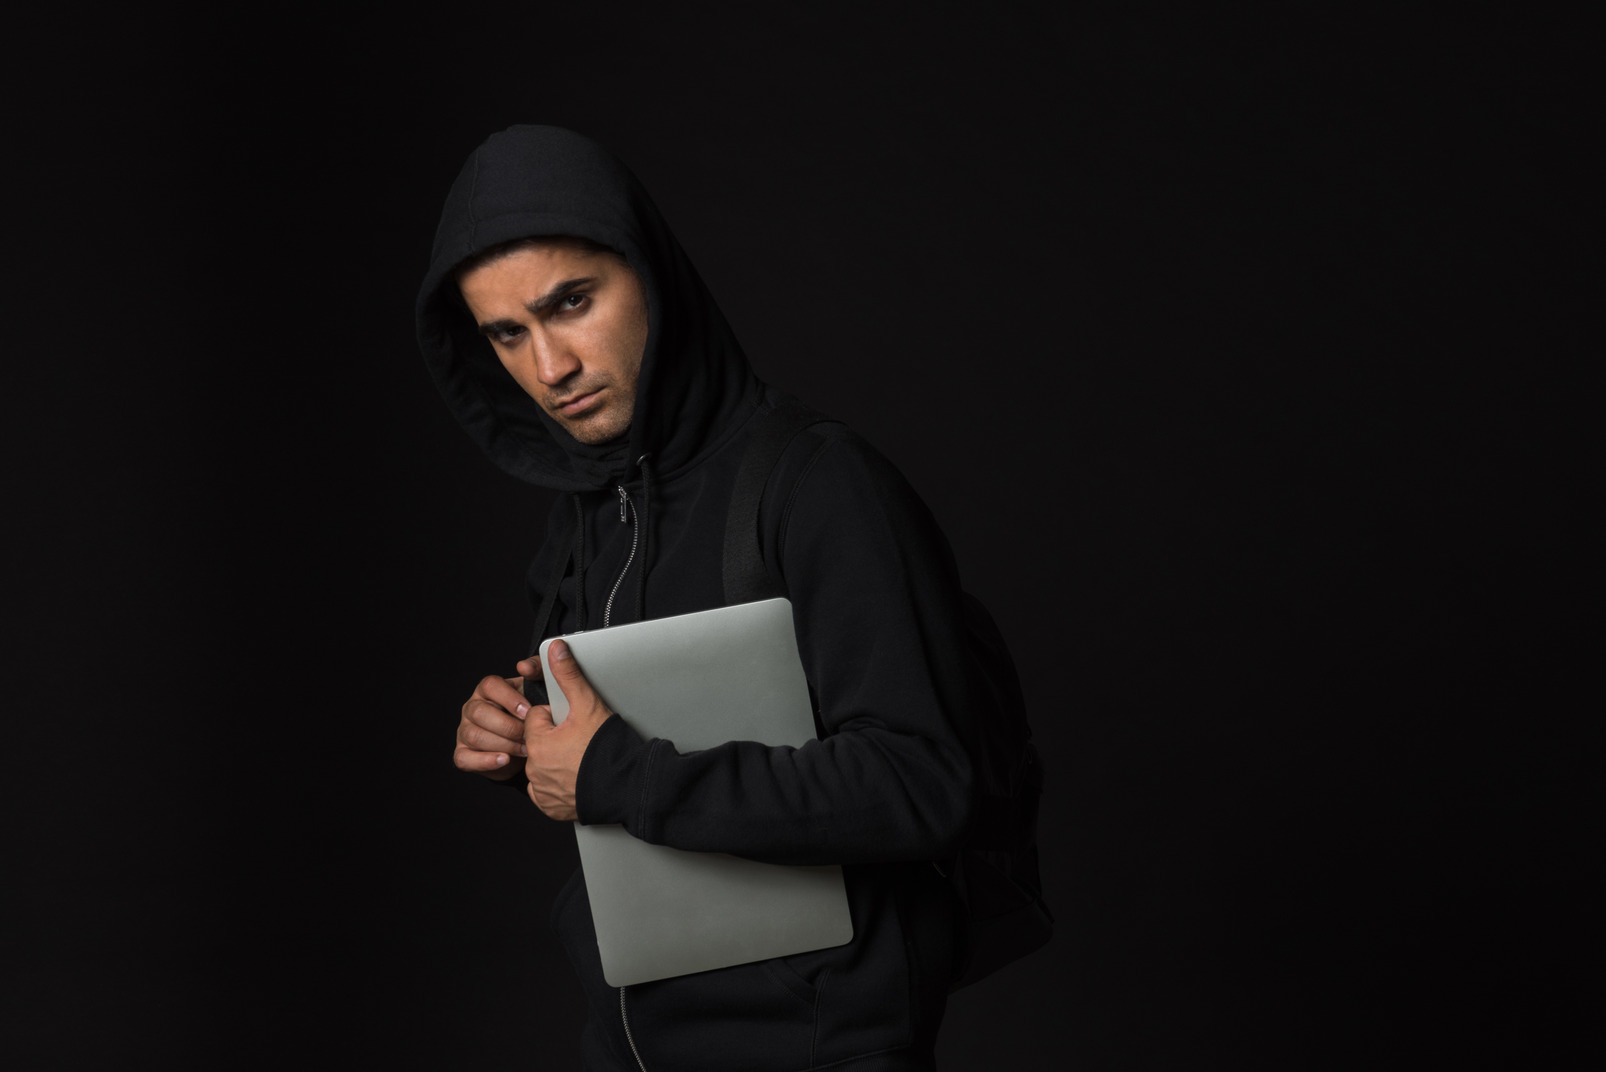 Hacker guy standing in the dark and holding laptop